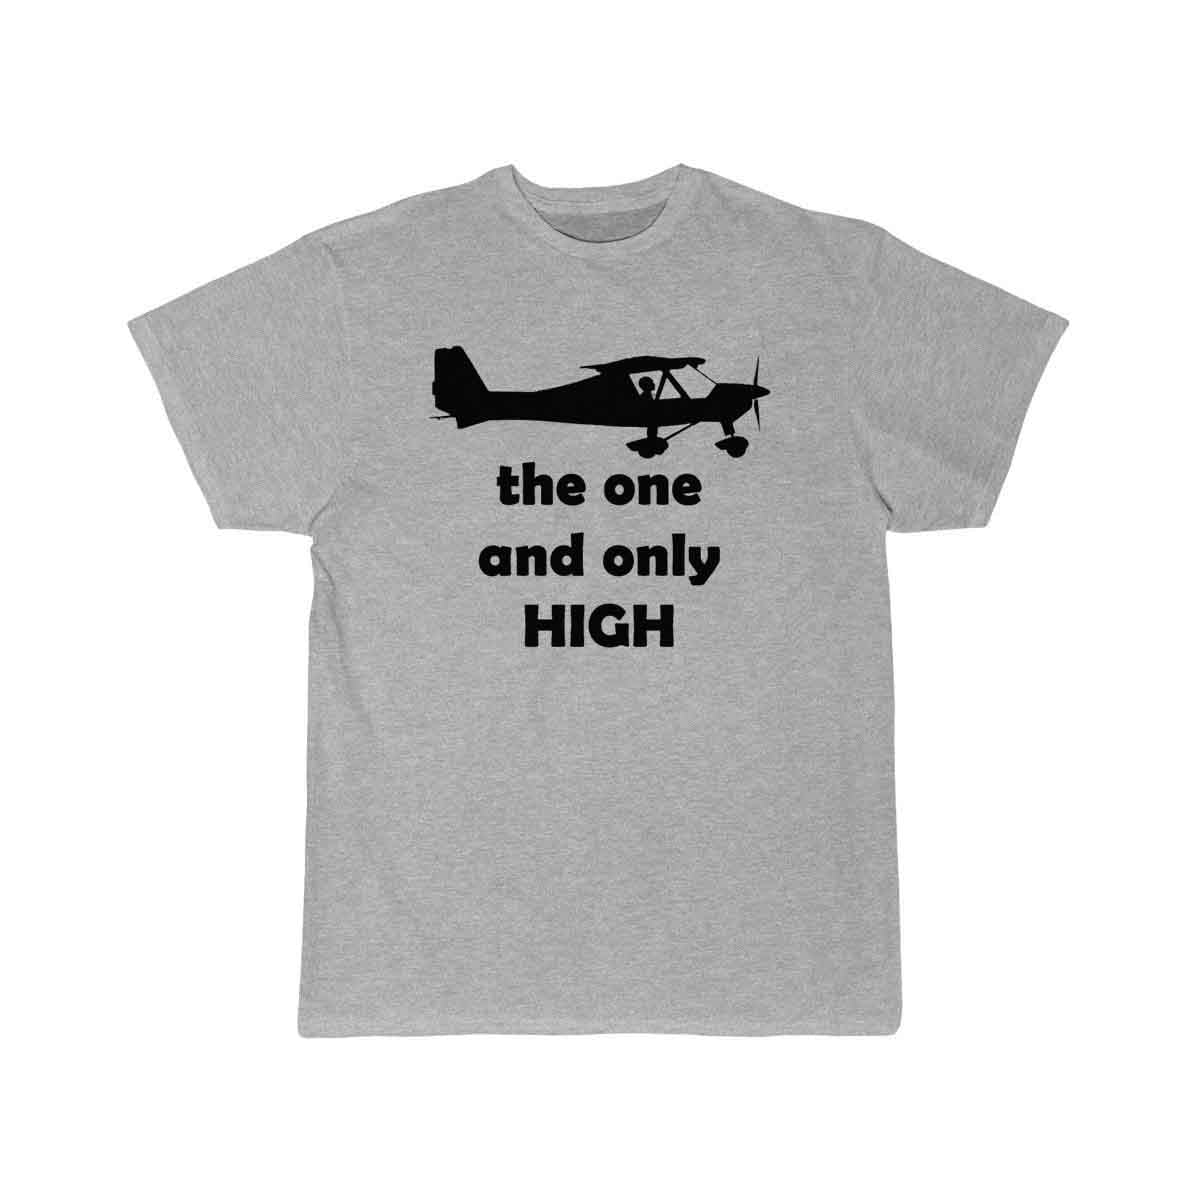 the one and only high is to fly T SHIRT THE AV8R